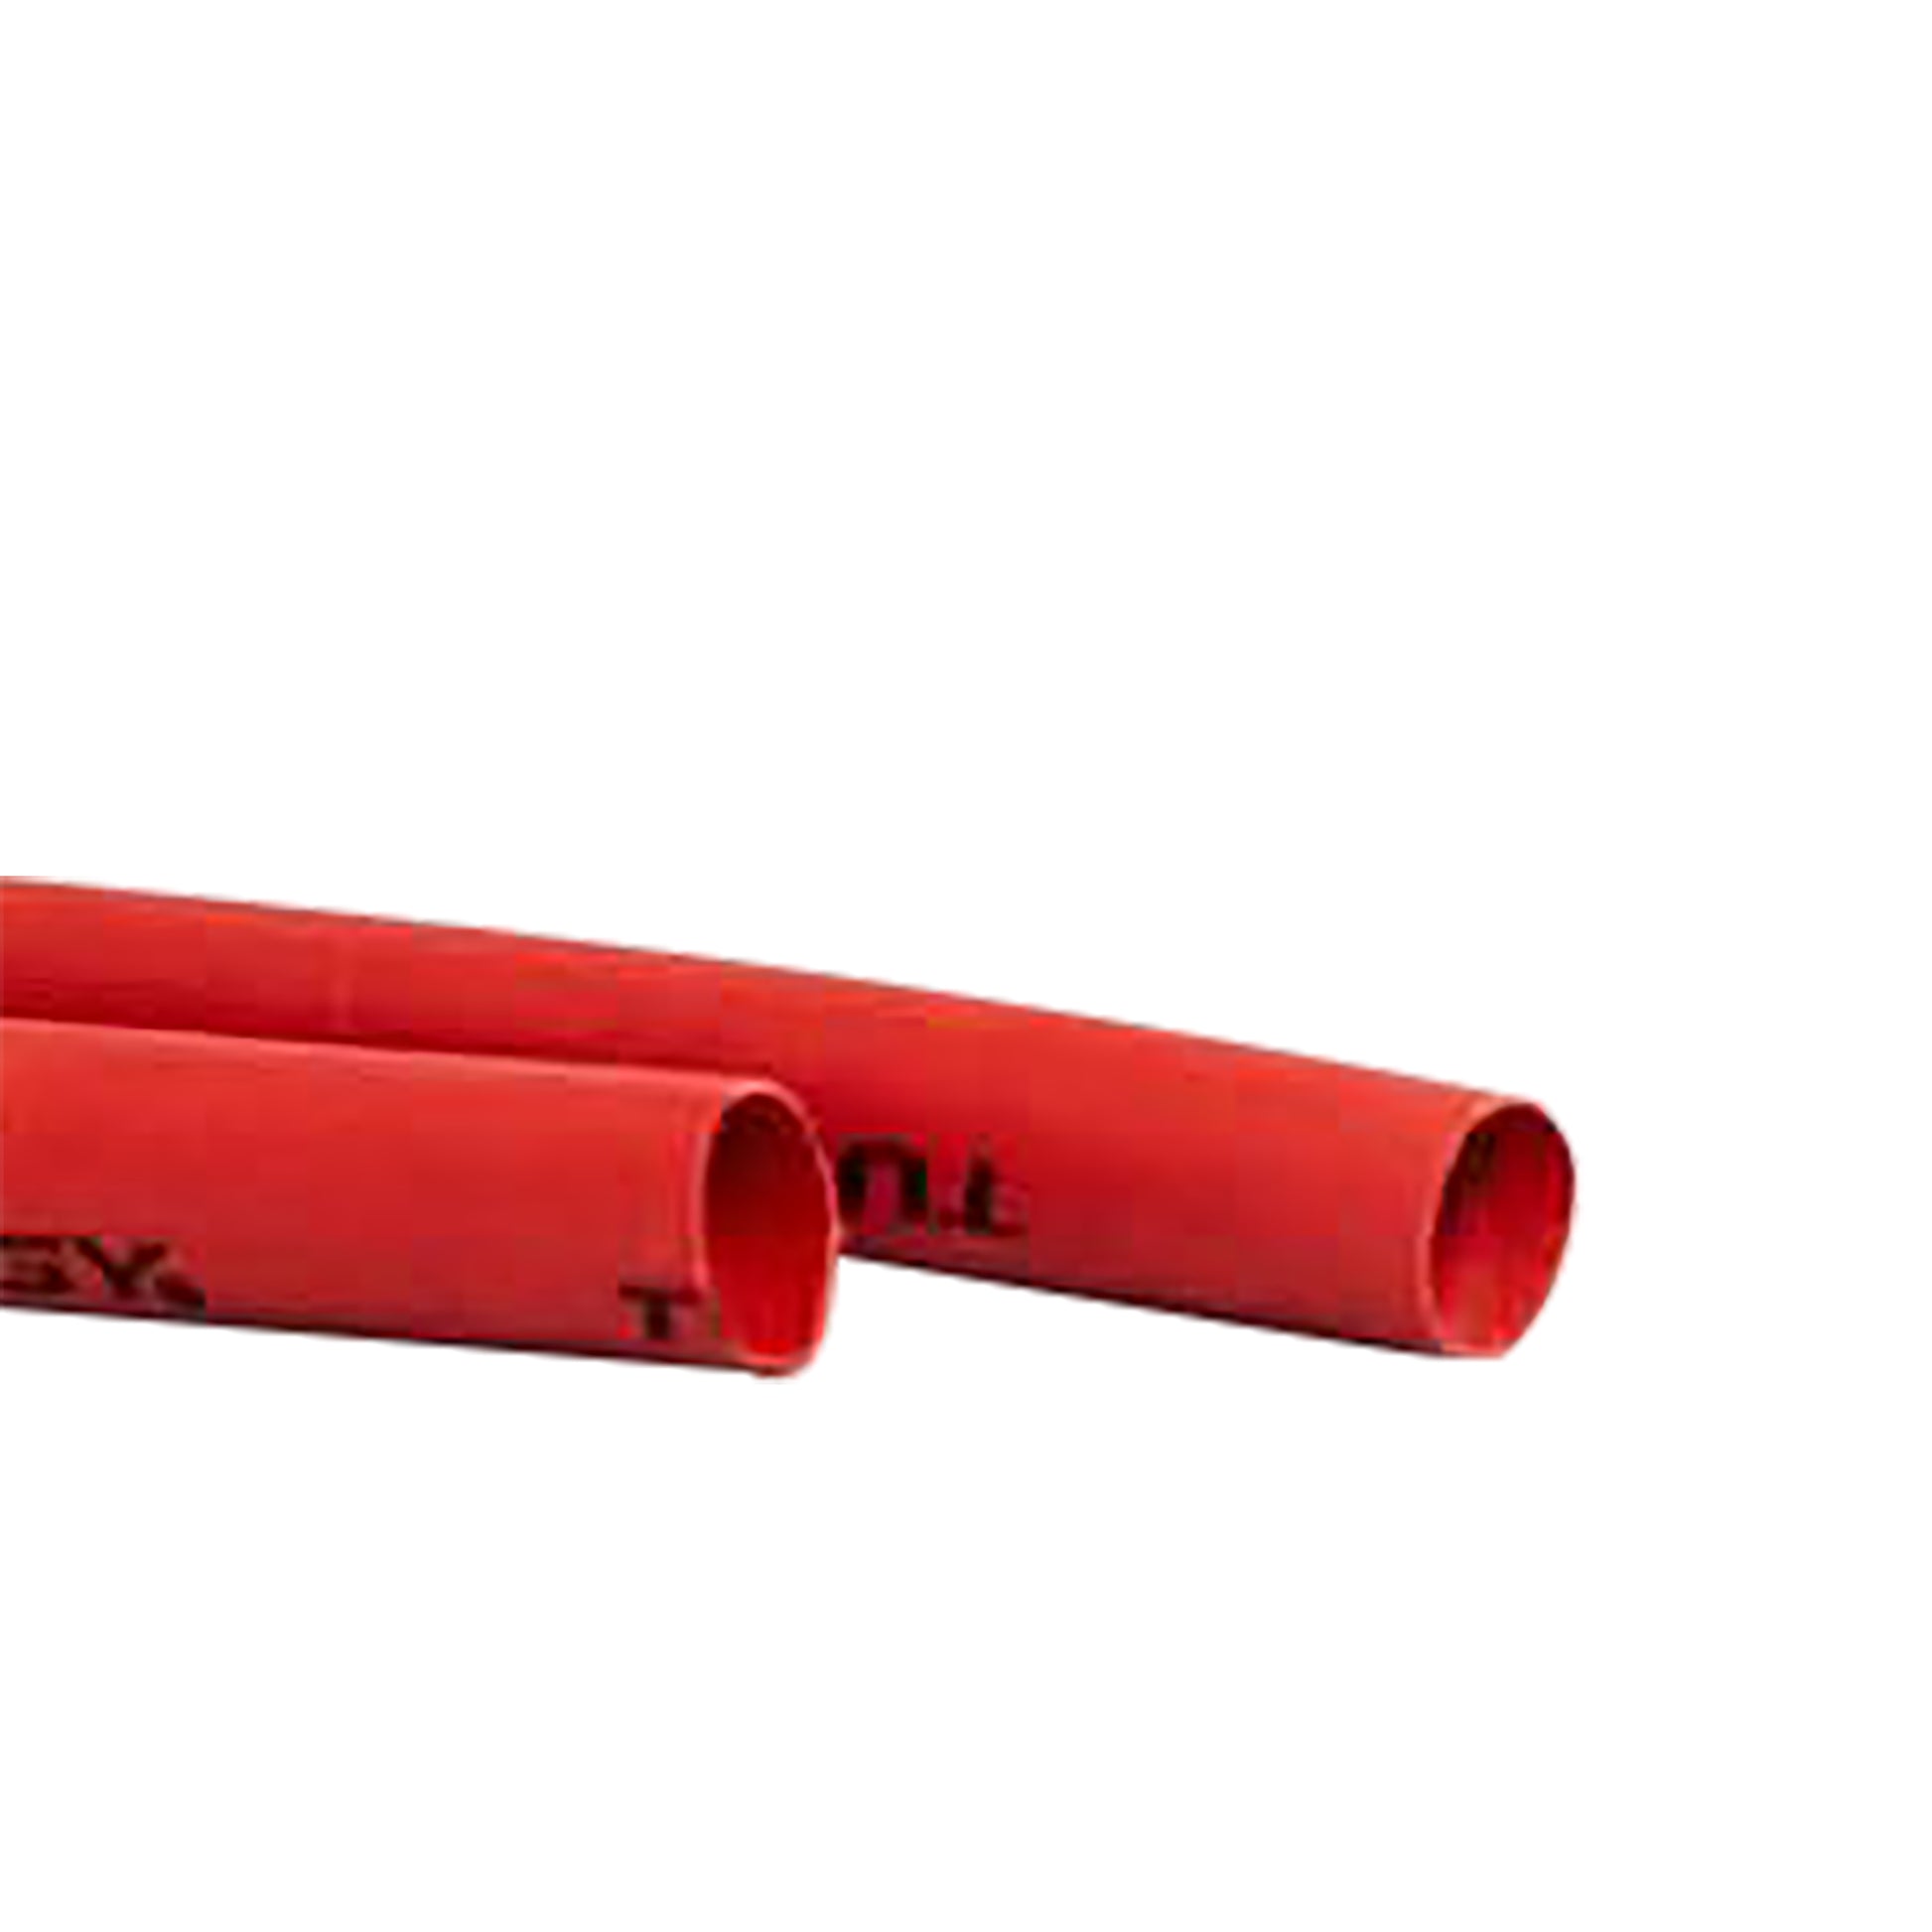 Flexible Thin Single Wall Non-Adhesive Heat Shrink Tubing 2:1 Red 1/4" ID - 12" Inch 10 Pack